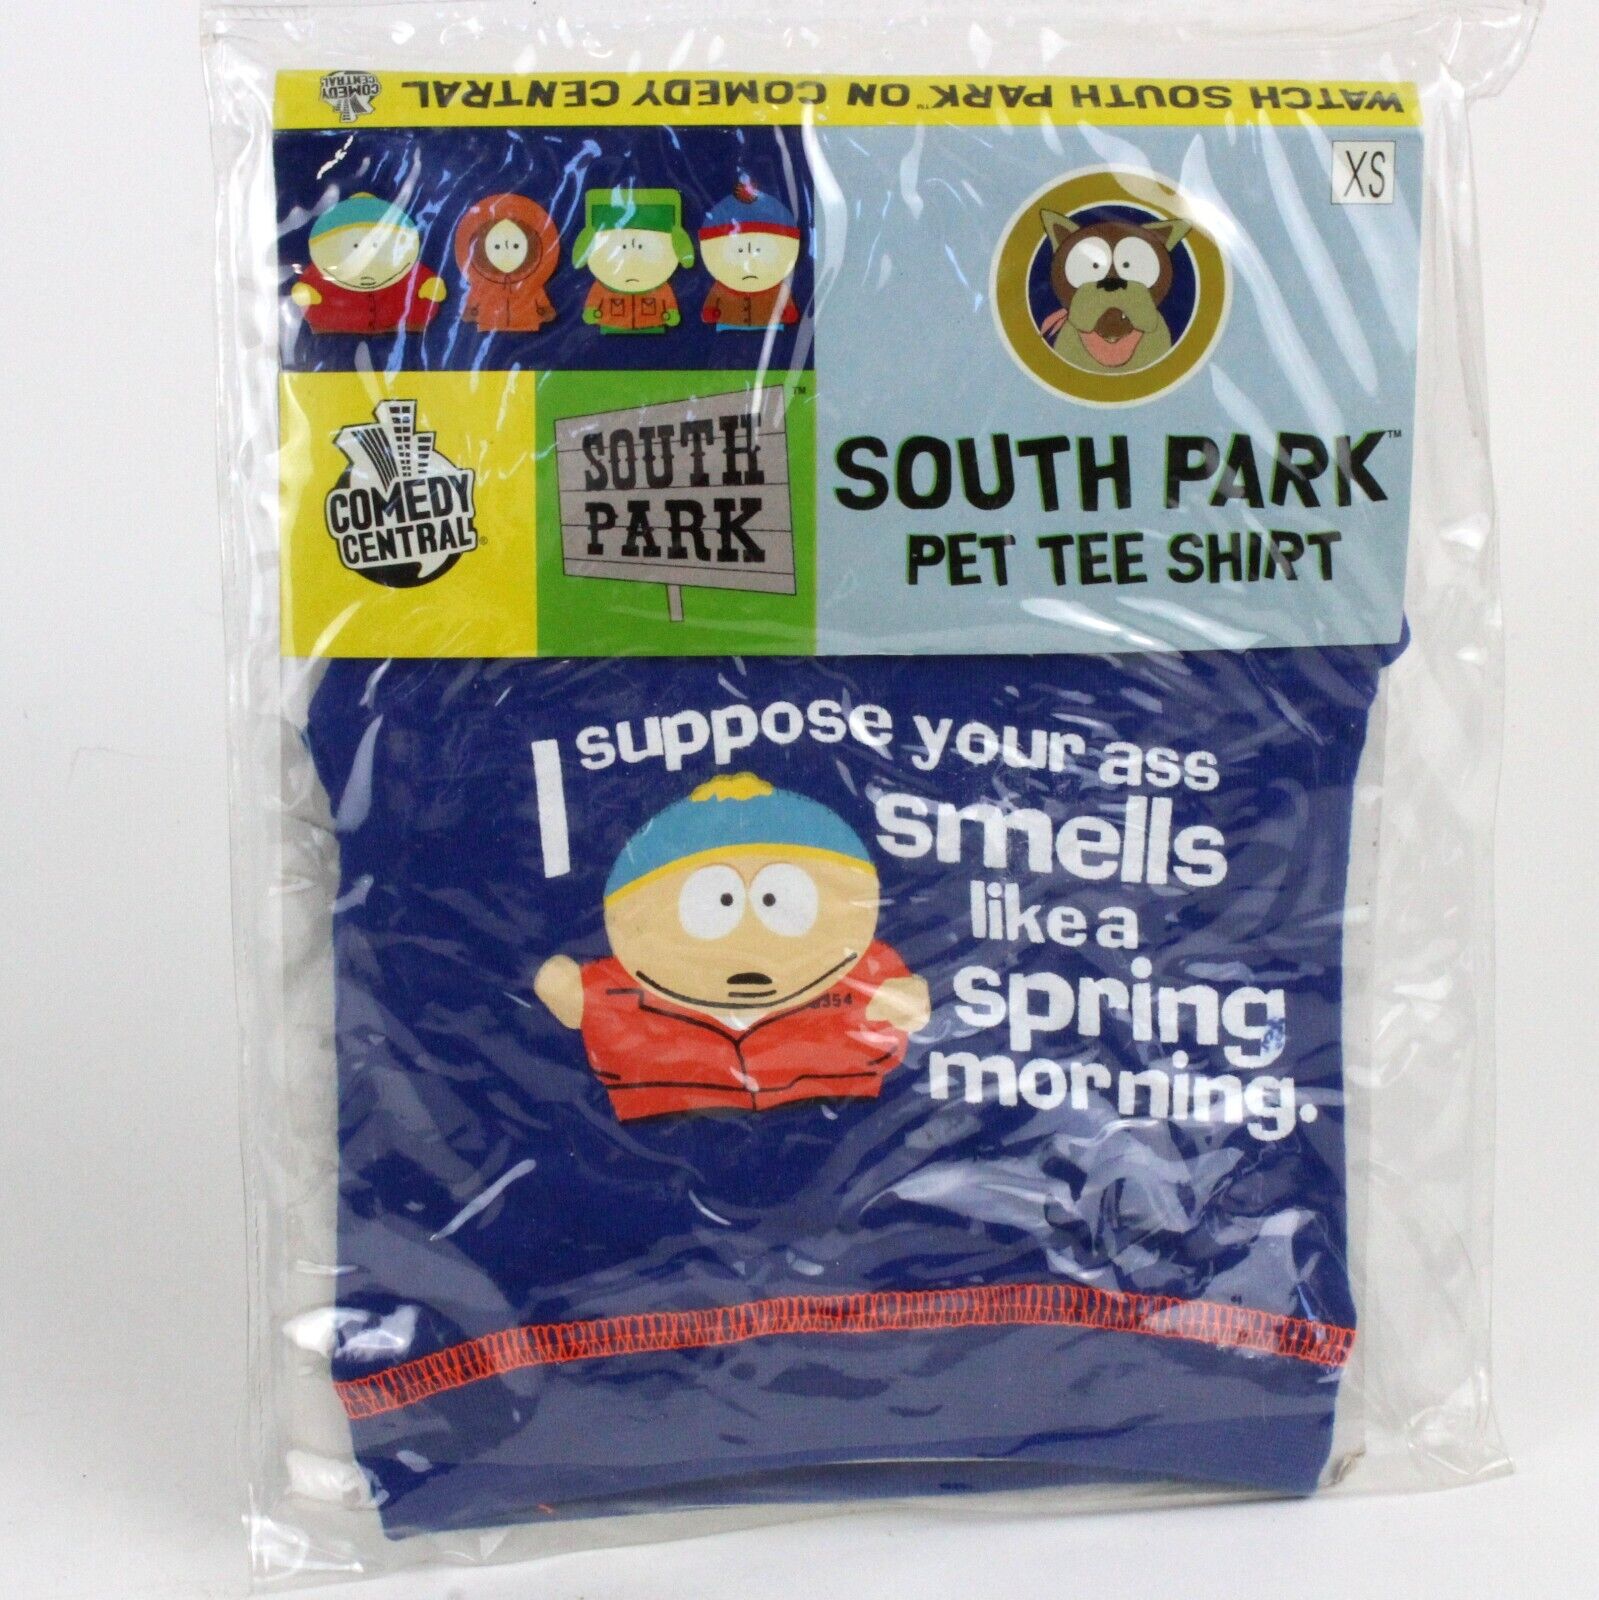 SOUTH PARK Pet Tee Shirt XS Comedy Central 2005 Pets First NOS 6-9 in Small dog